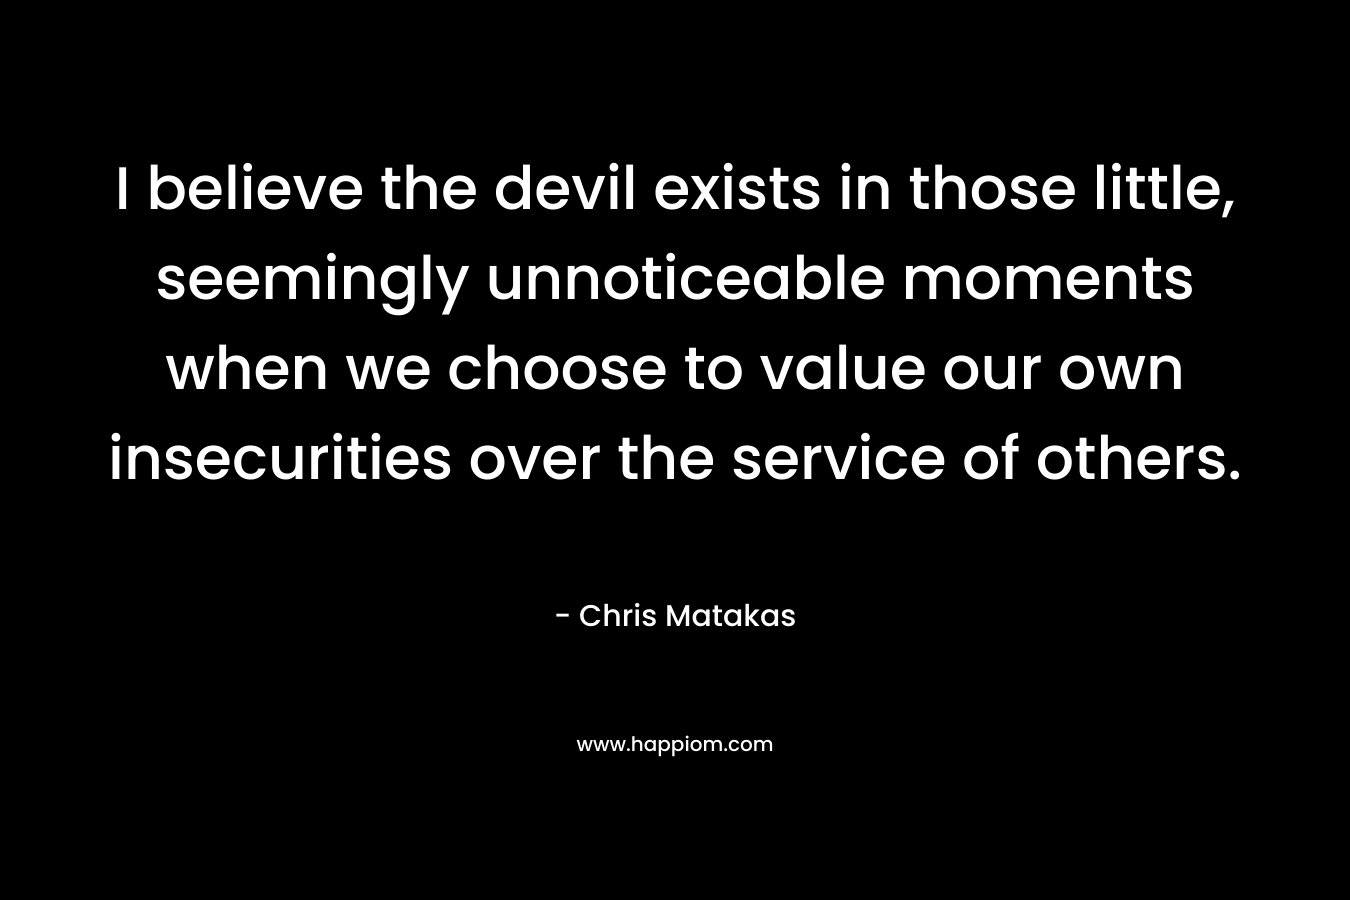 I believe the devil exists in those little, seemingly unnoticeable moments when we choose to value our own insecurities over the service of others. – Chris Matakas